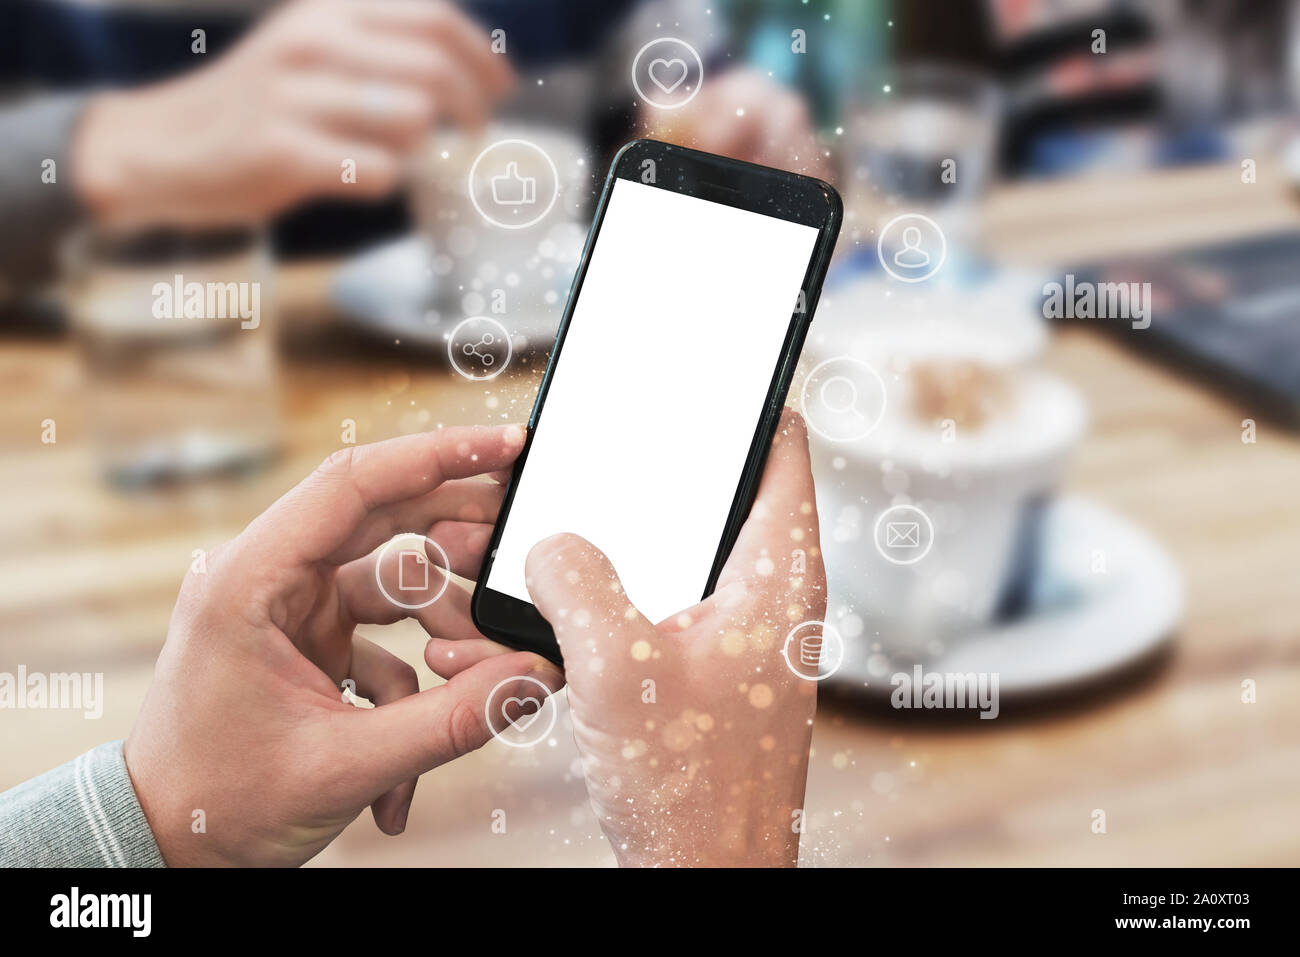 Phone in man hands with isolated display for mockup. Internet of things icons beside. Concept of using mobile technologies. Stock Photo